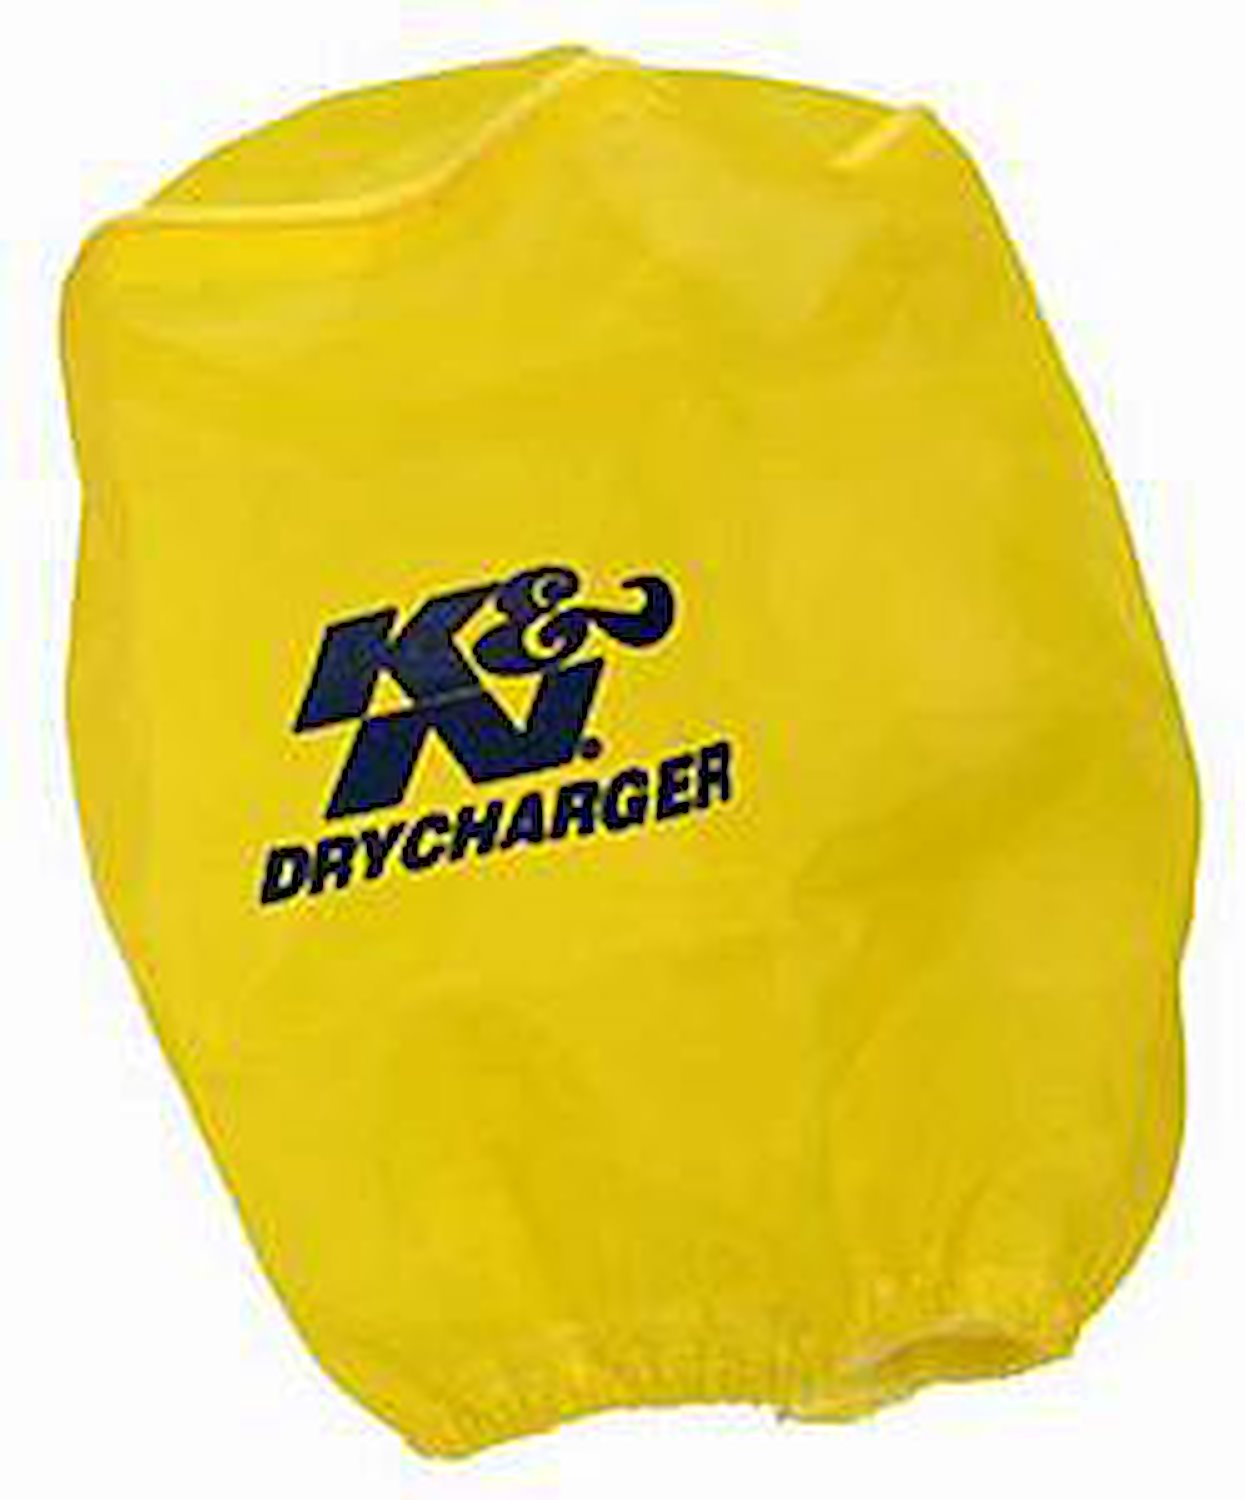 DRYCHARGER WRAP RX-4730 YELLOW